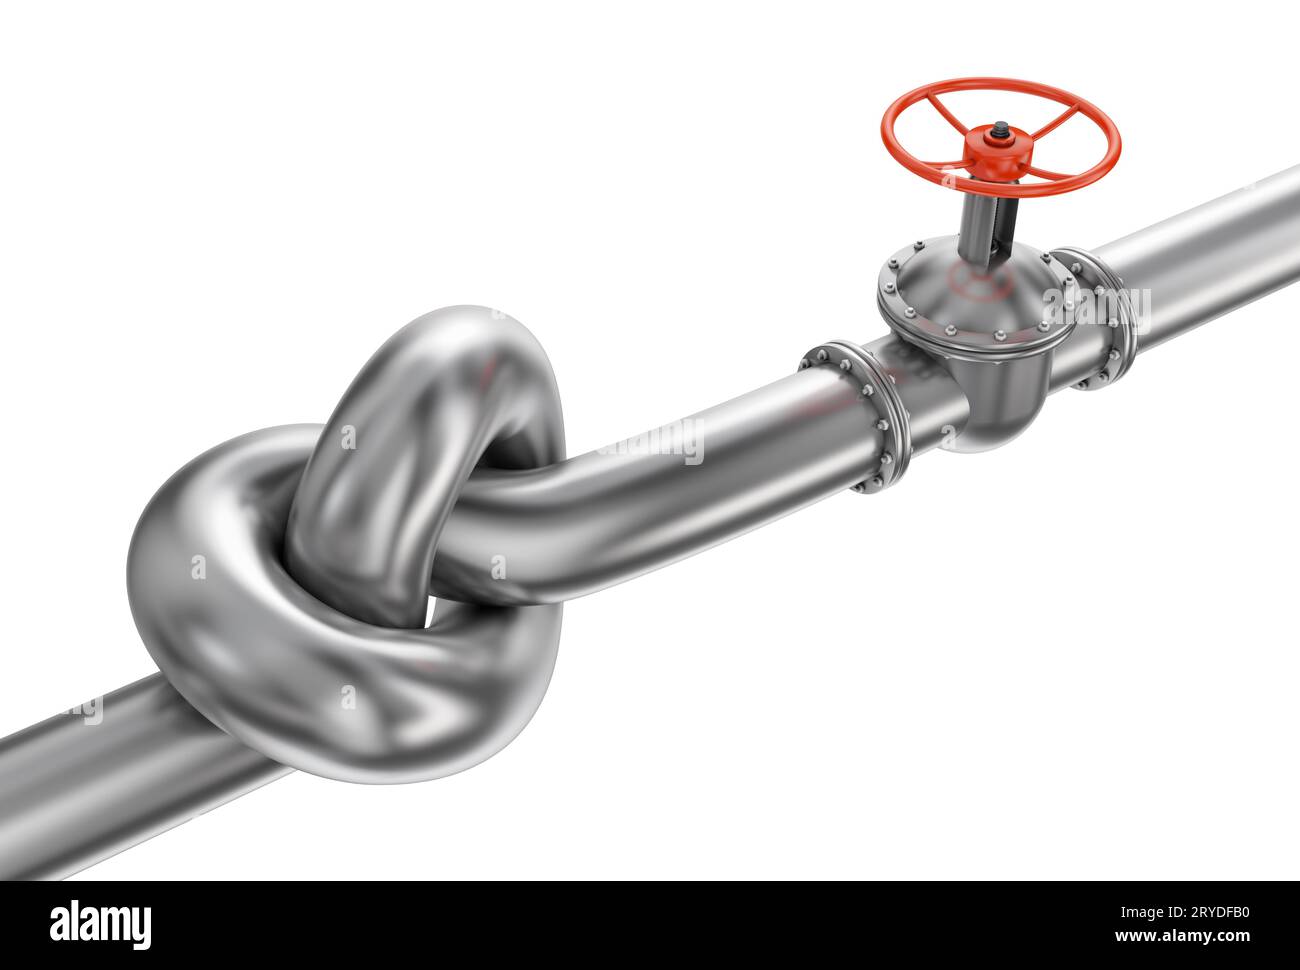 Knot and valve Stock Photo